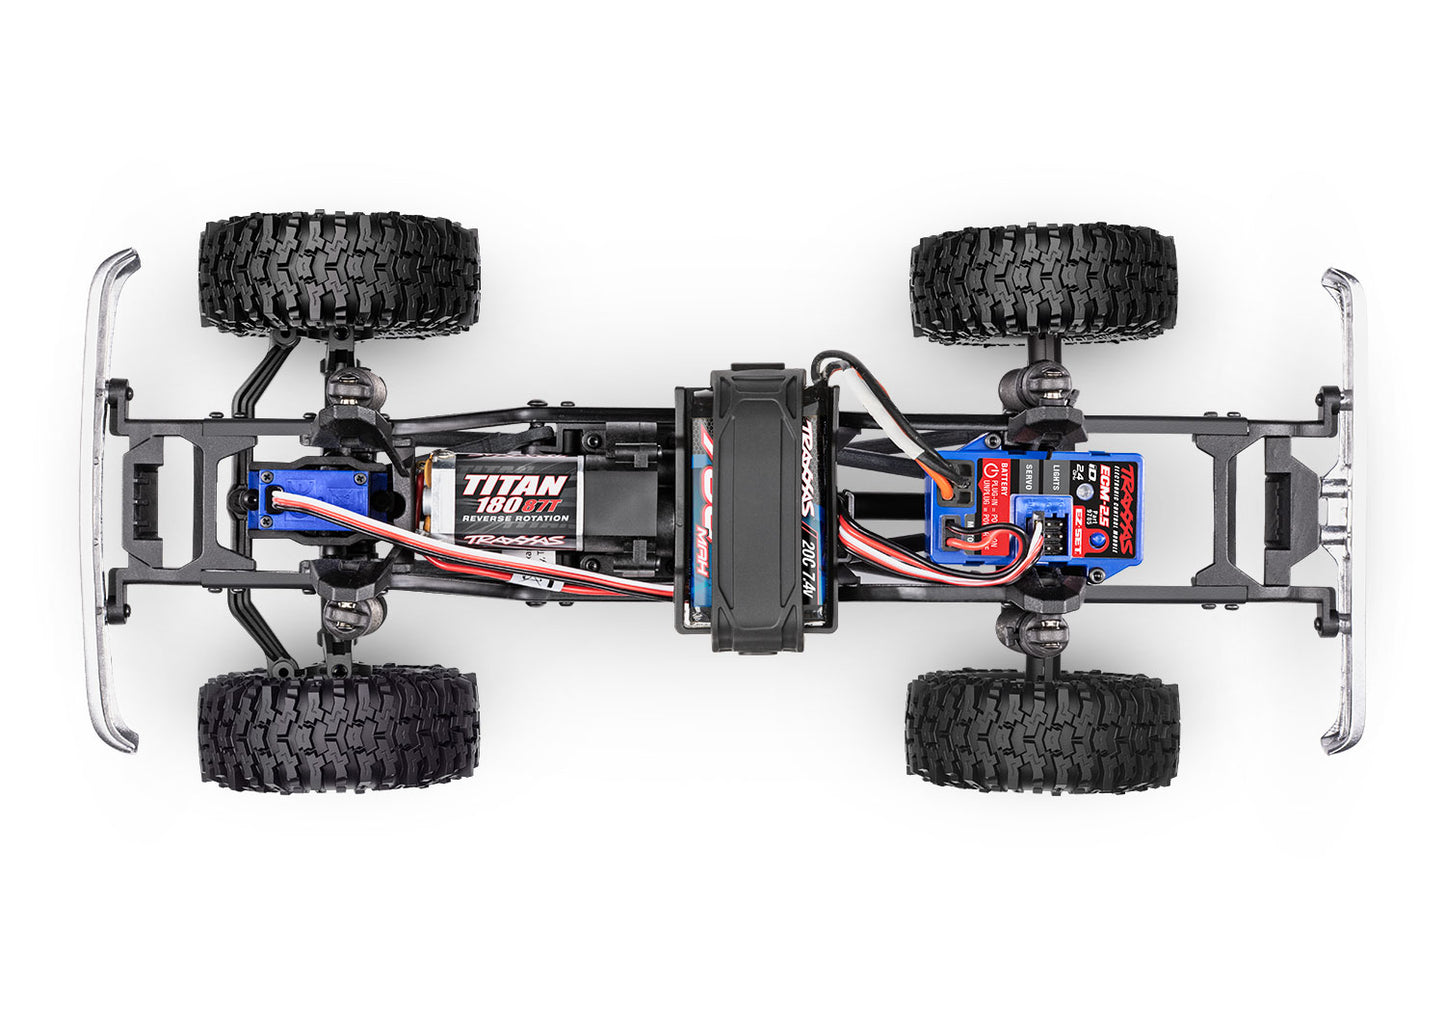 Traxxas 97064-1 Black TRX-4M 1/18 Chevrolet K10 High Trail Edition AVAILABLE IN STORES ONLY